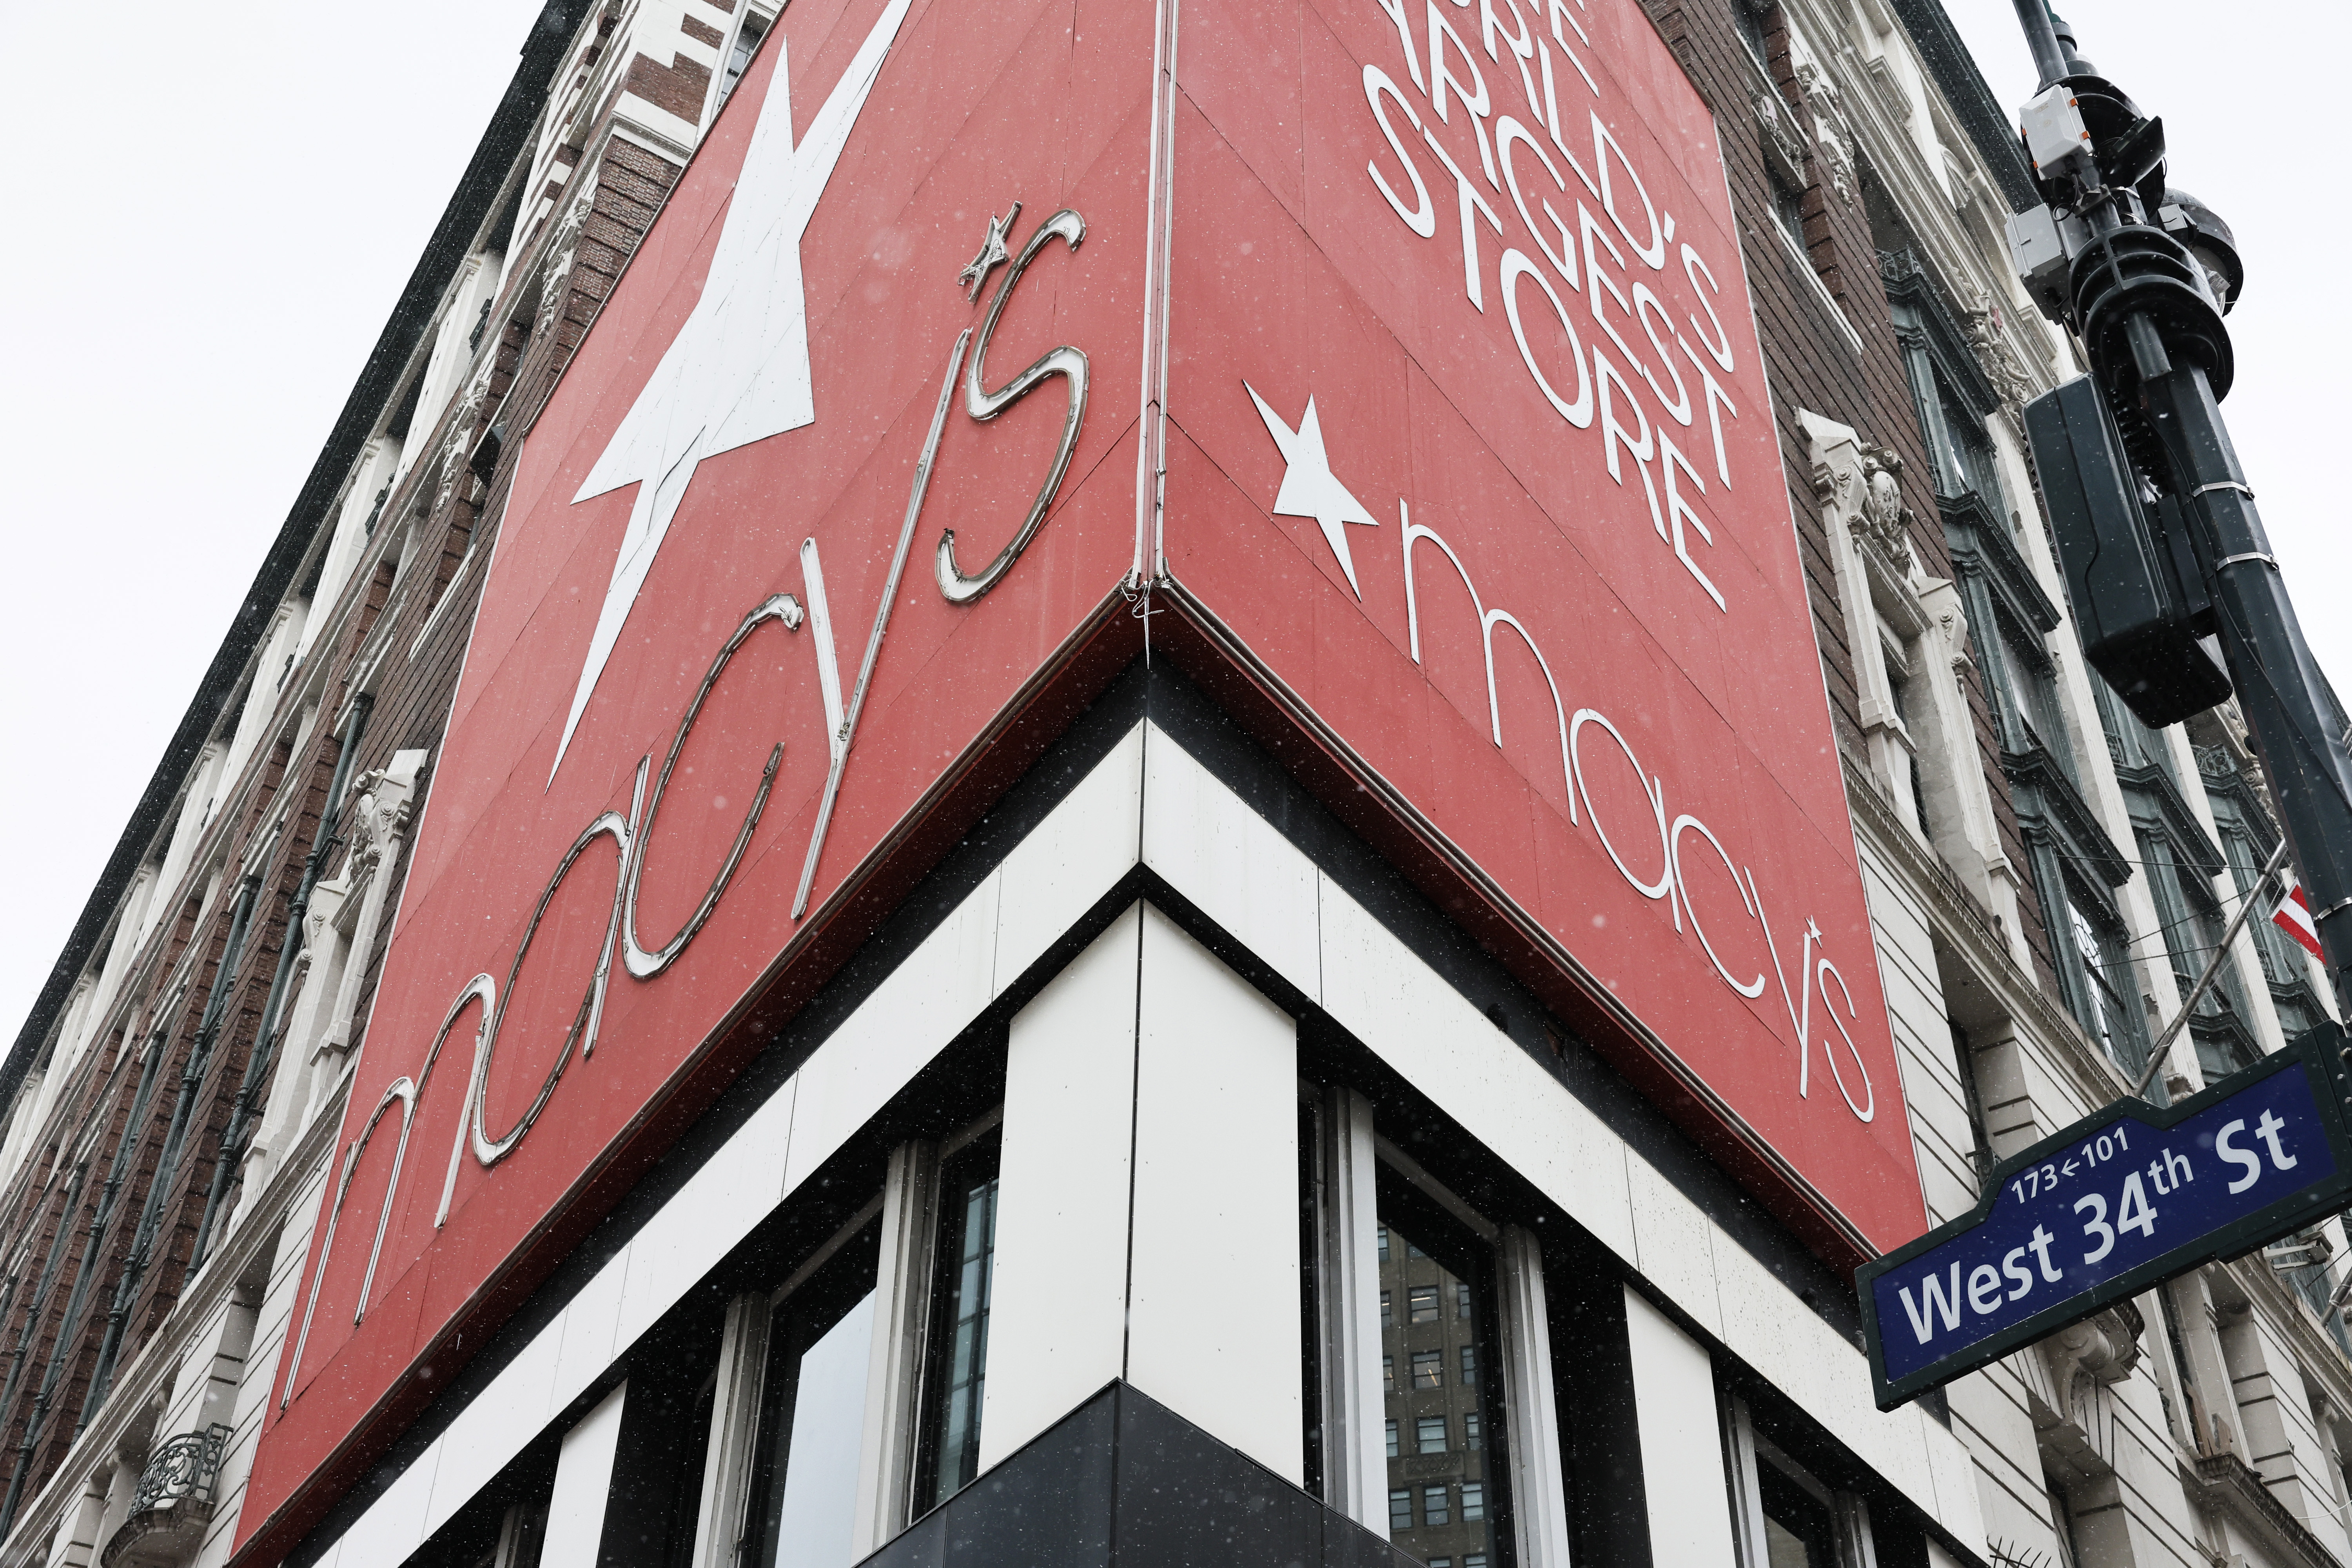 NEWSLINE: Macy's set to close 150 stores—what's next?